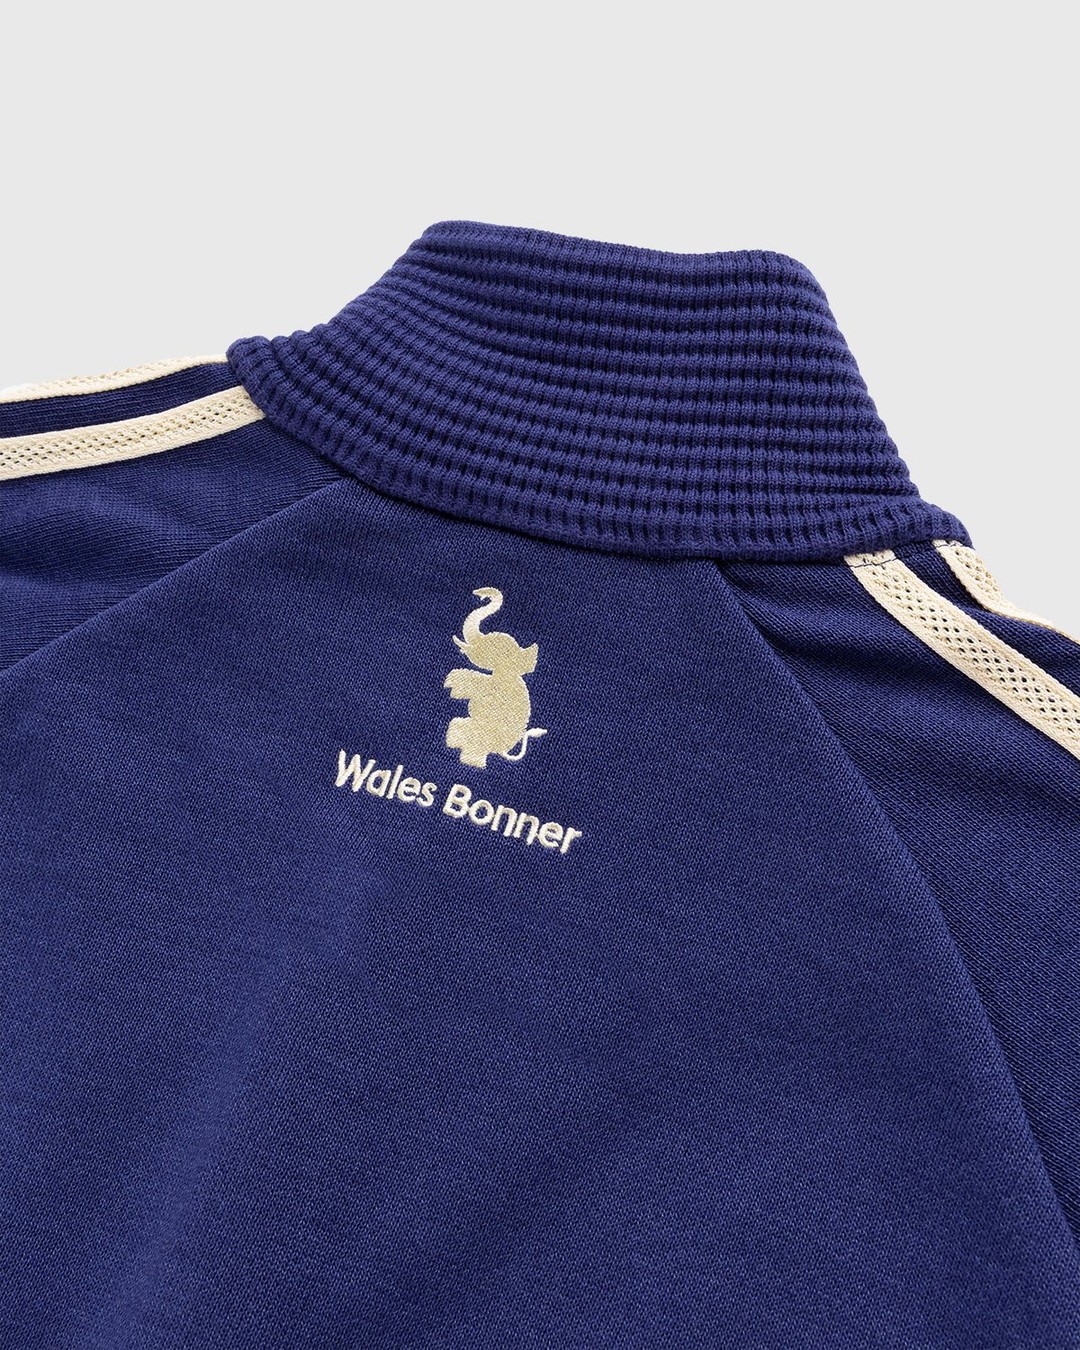 Adidas x Wales Bonner – 80s Track Top Night Sky - Outerwear - Blue - Image 7